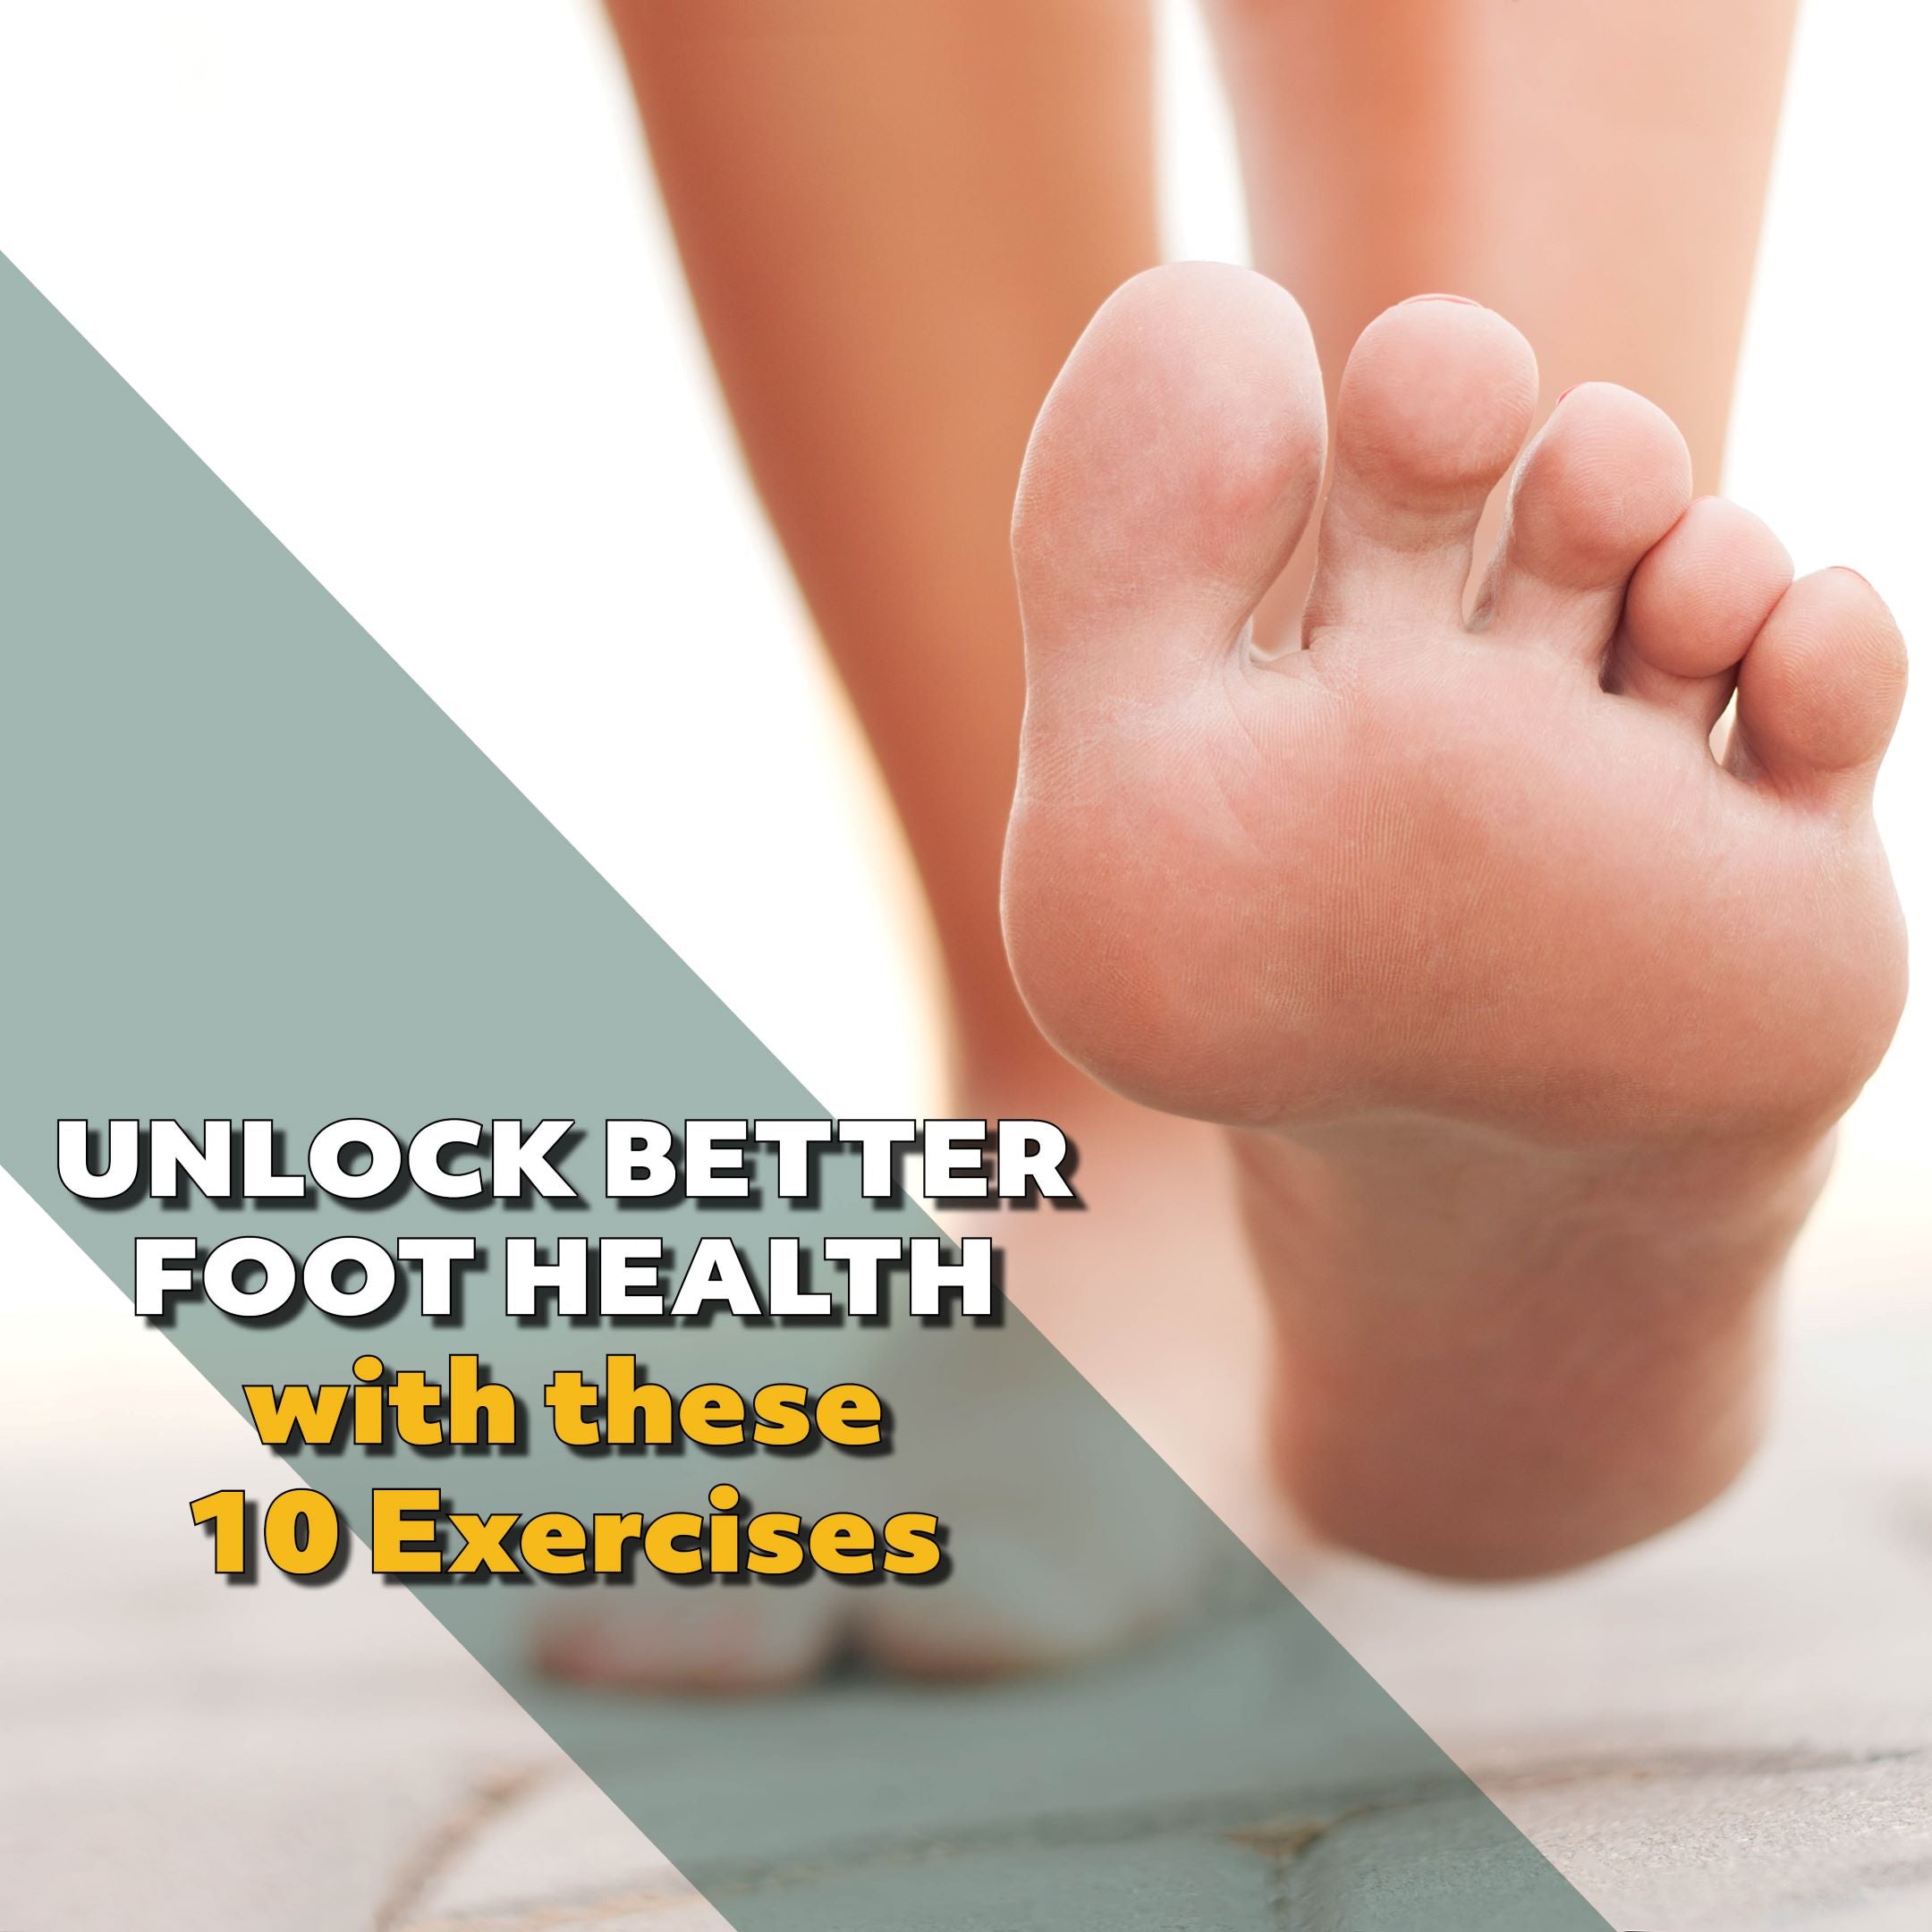 Unlock Better Foot Health: 10 Exercises for Improved Function, Dexterity, Mobilisation, and Balance